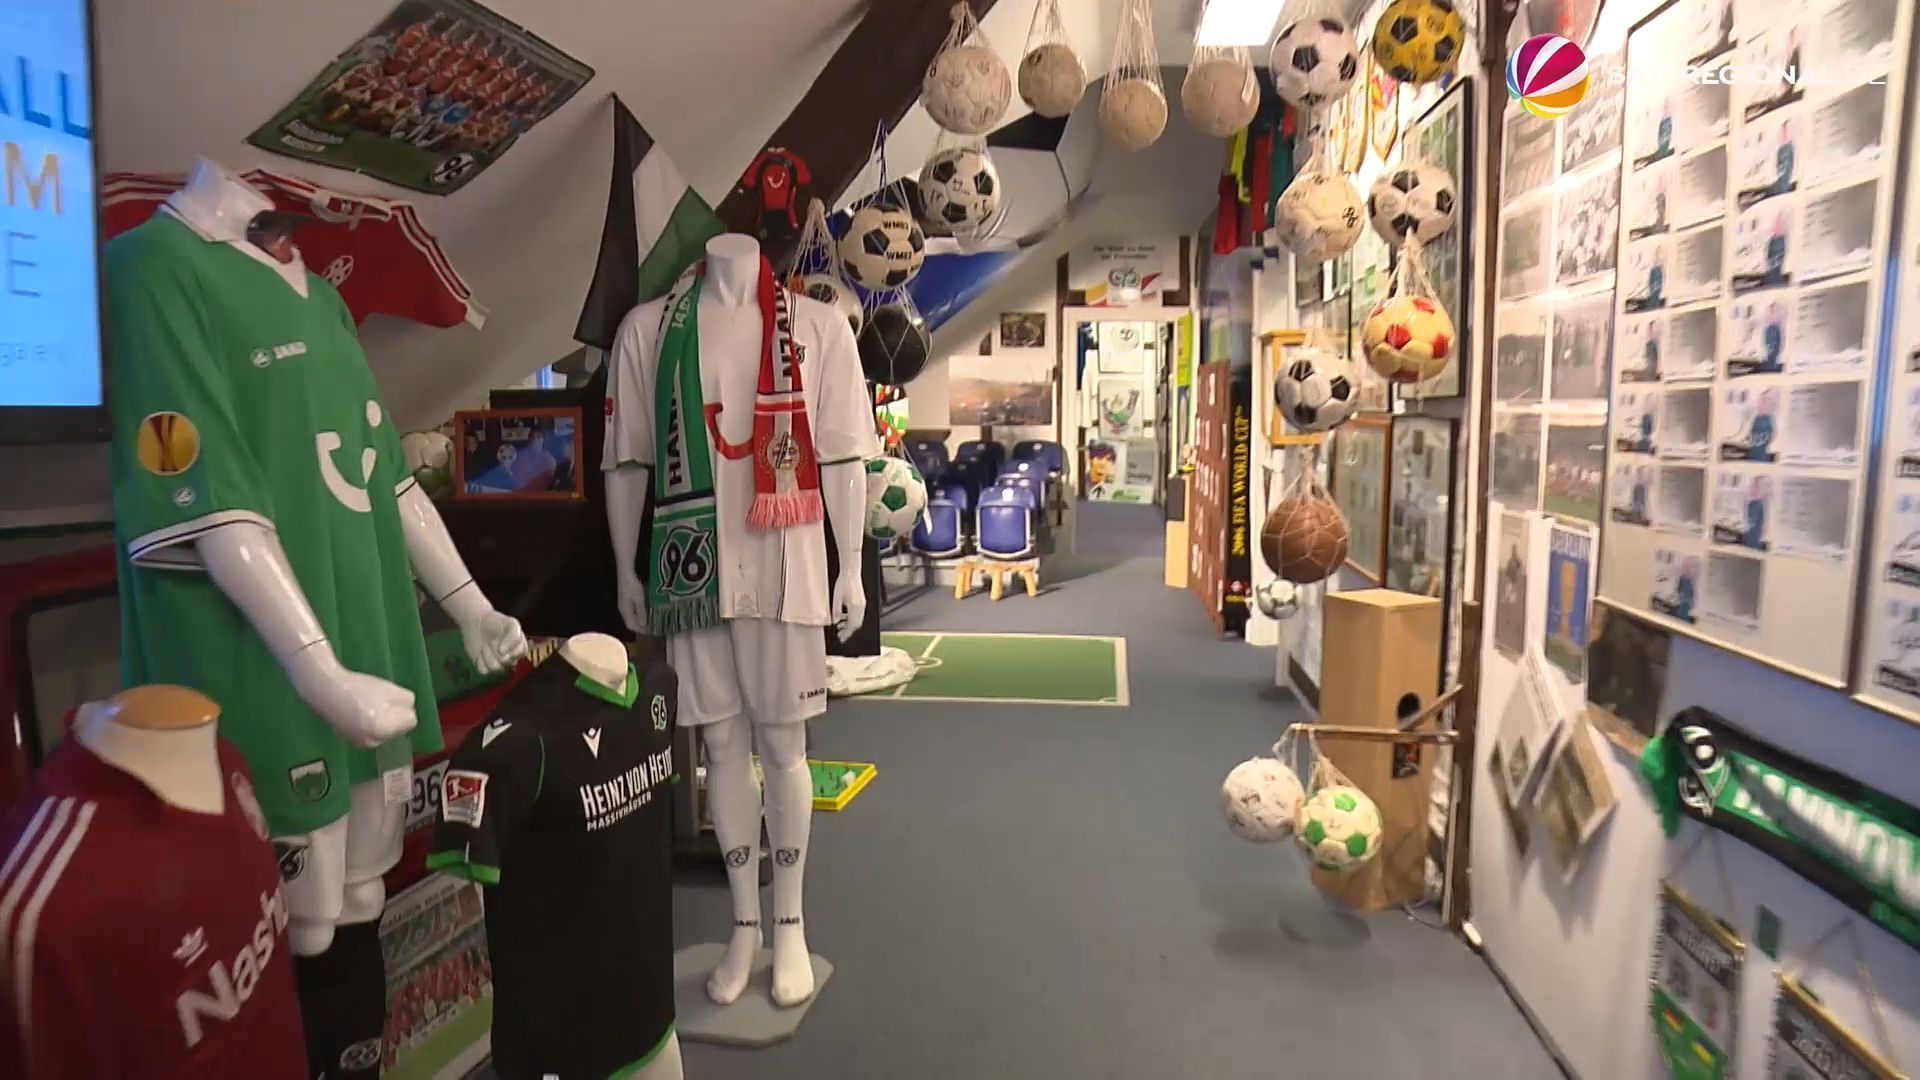 Sports Collection Saloga: Over 10,000 exhibits in soccer museum in Springe